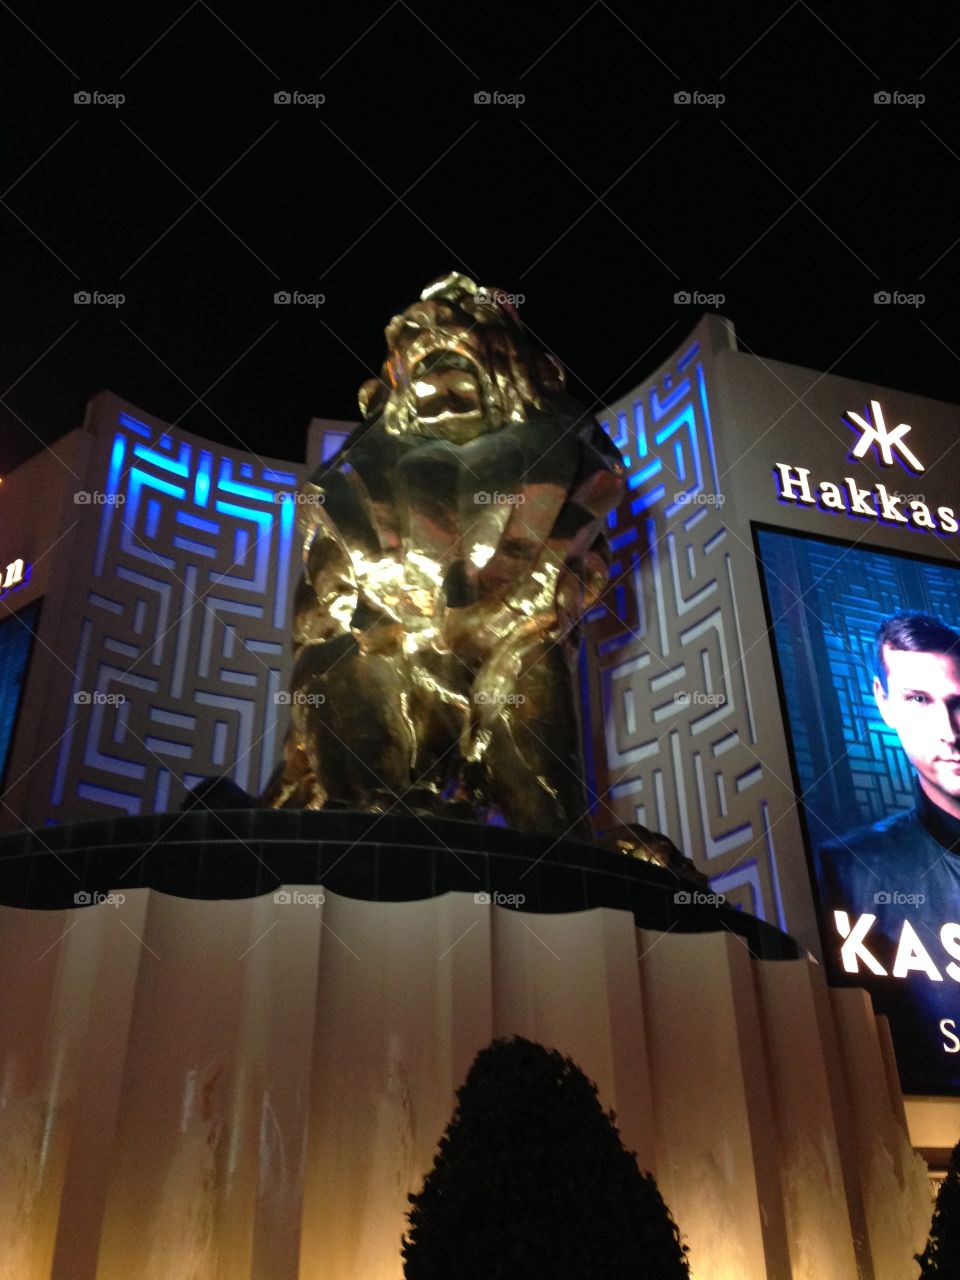 MGM Grand

Published by:
HappyBrownMonkey 